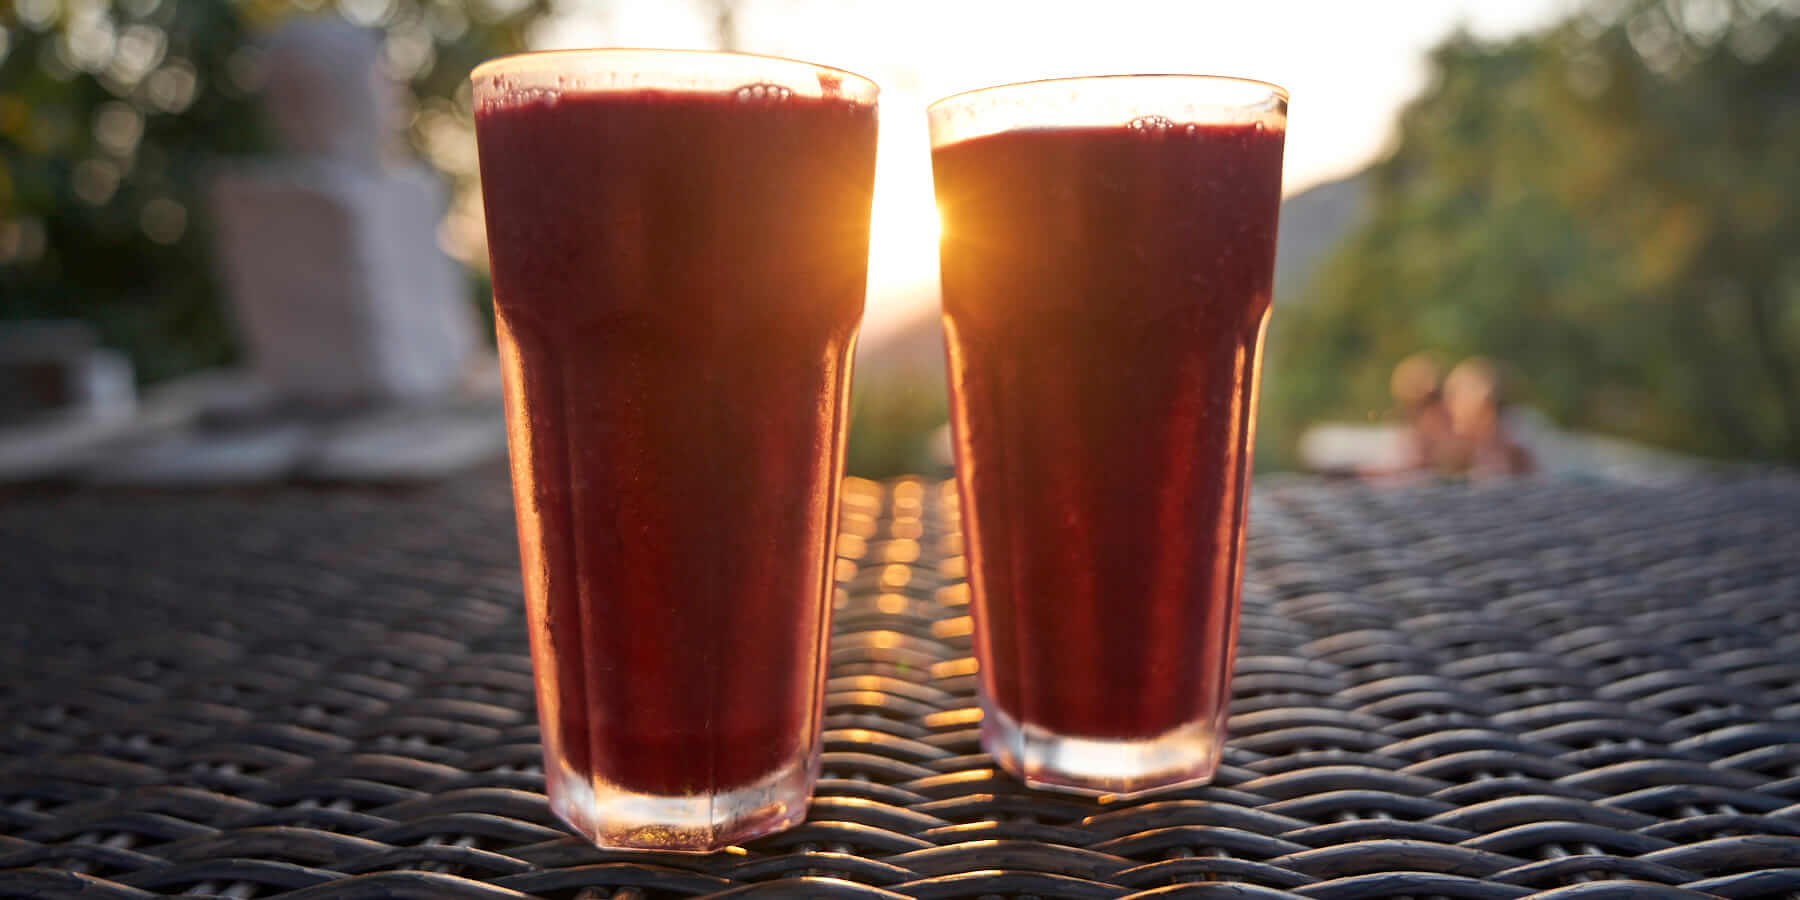 Two juices at Juicy Mountain with the sunset